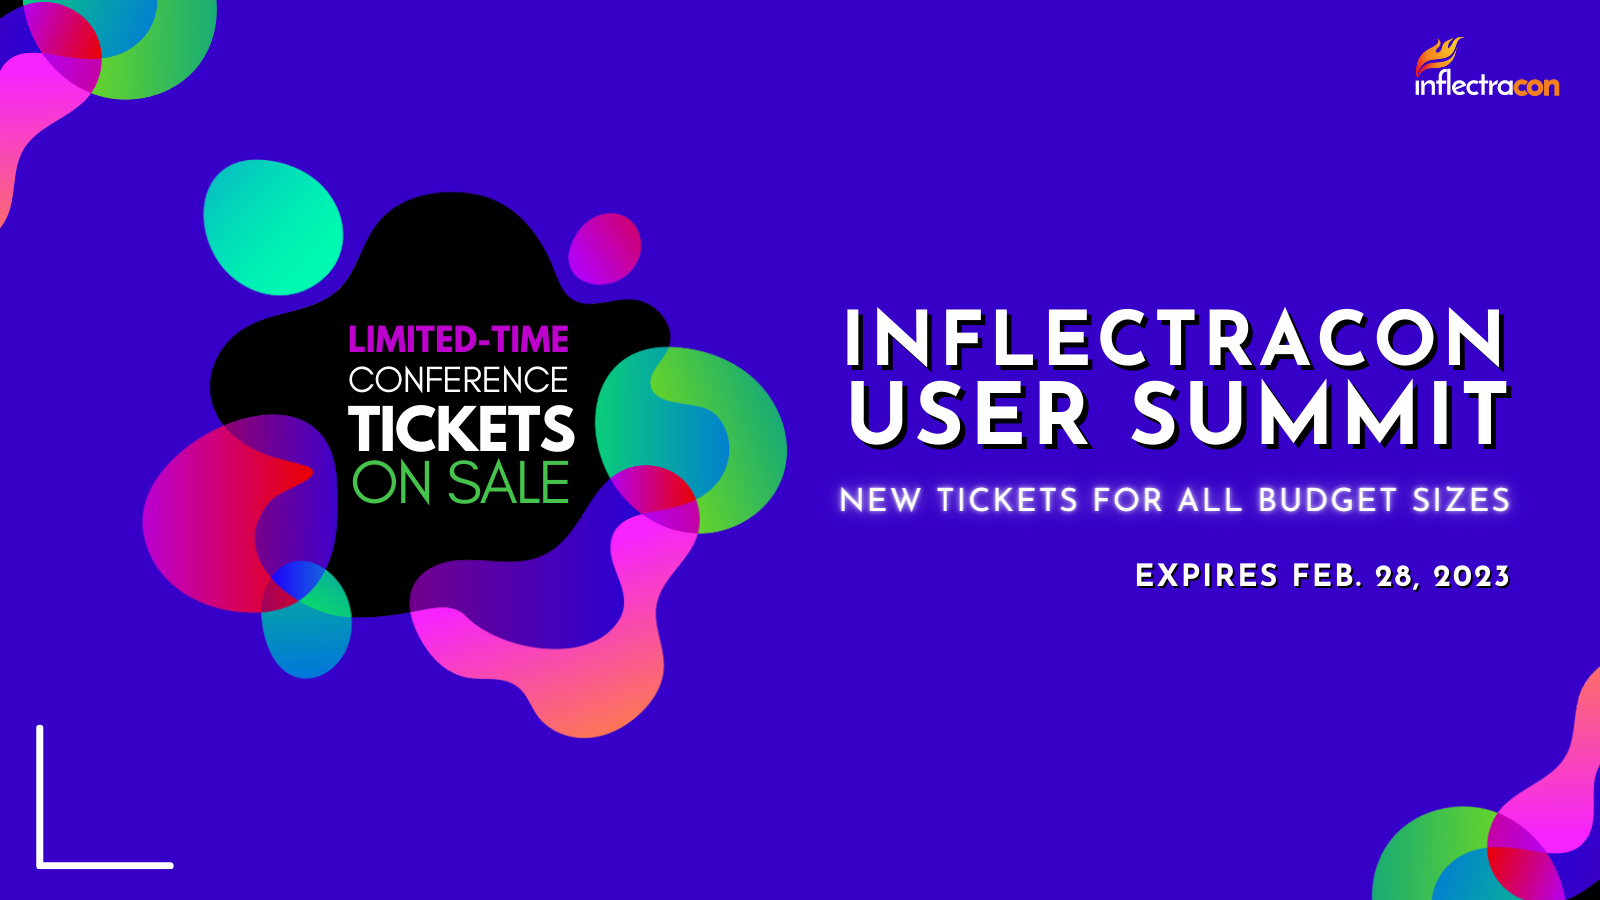 inflectracon-user-summit-new-tickets-for-all-budget-sizes-image